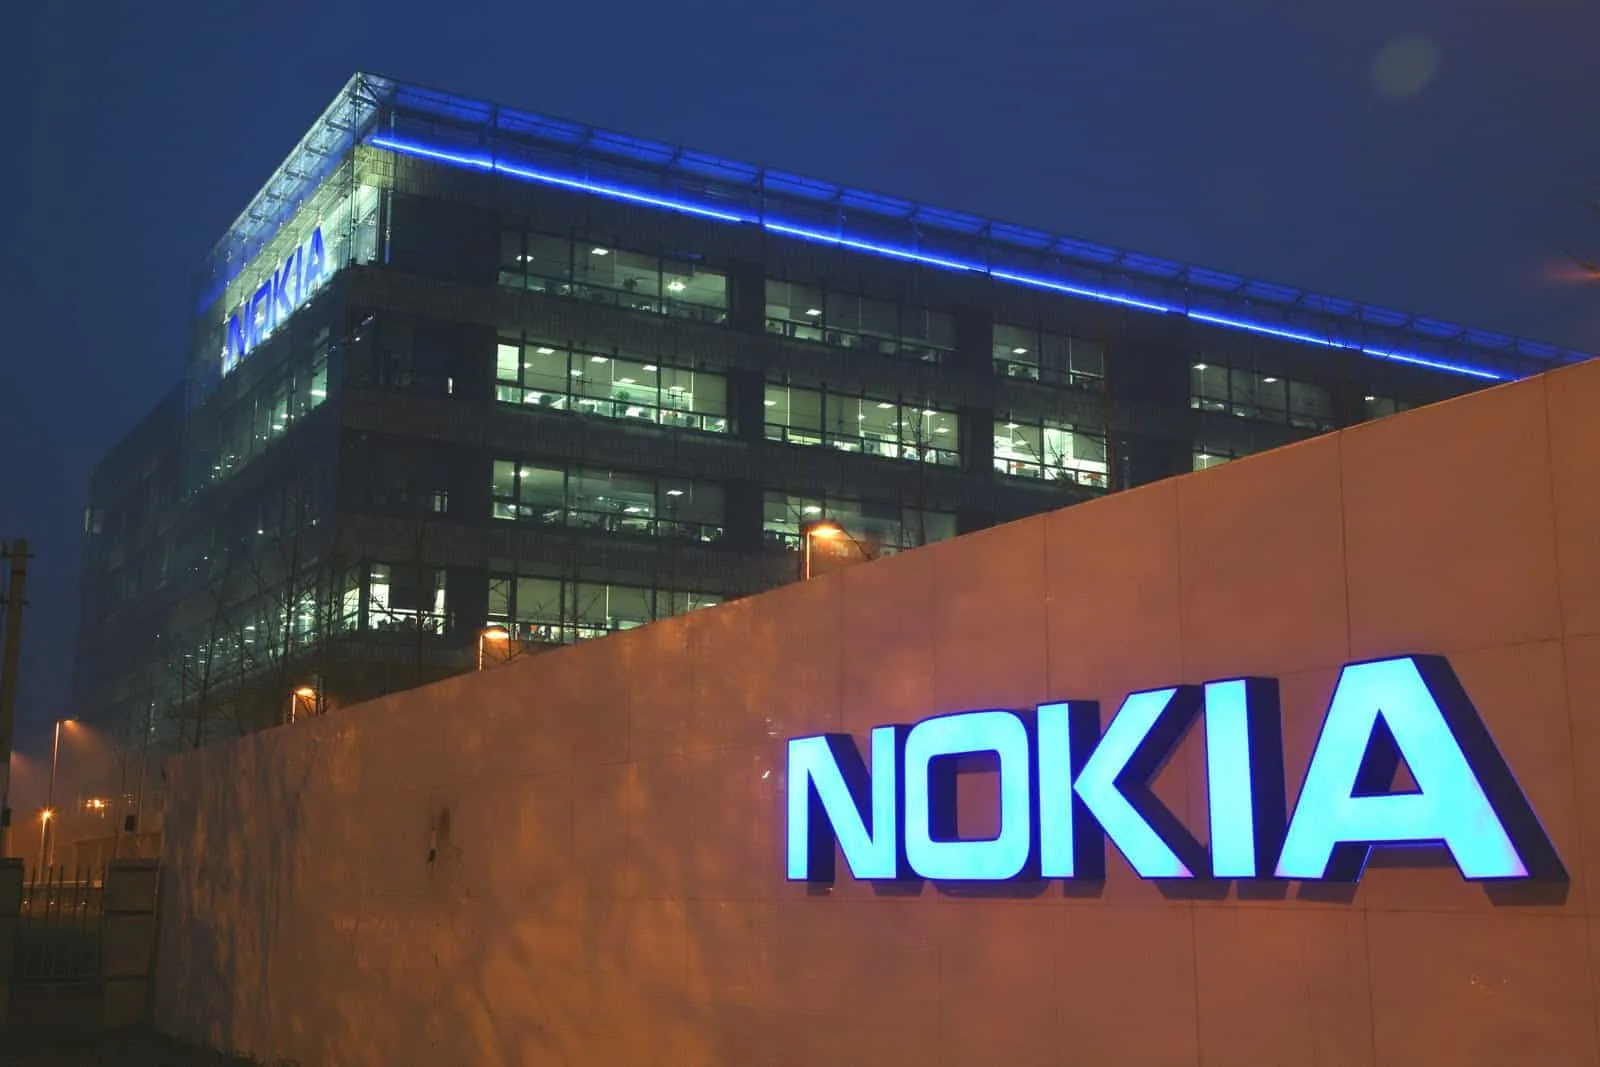 Nokia emerges as India’s most trusted mobile phone